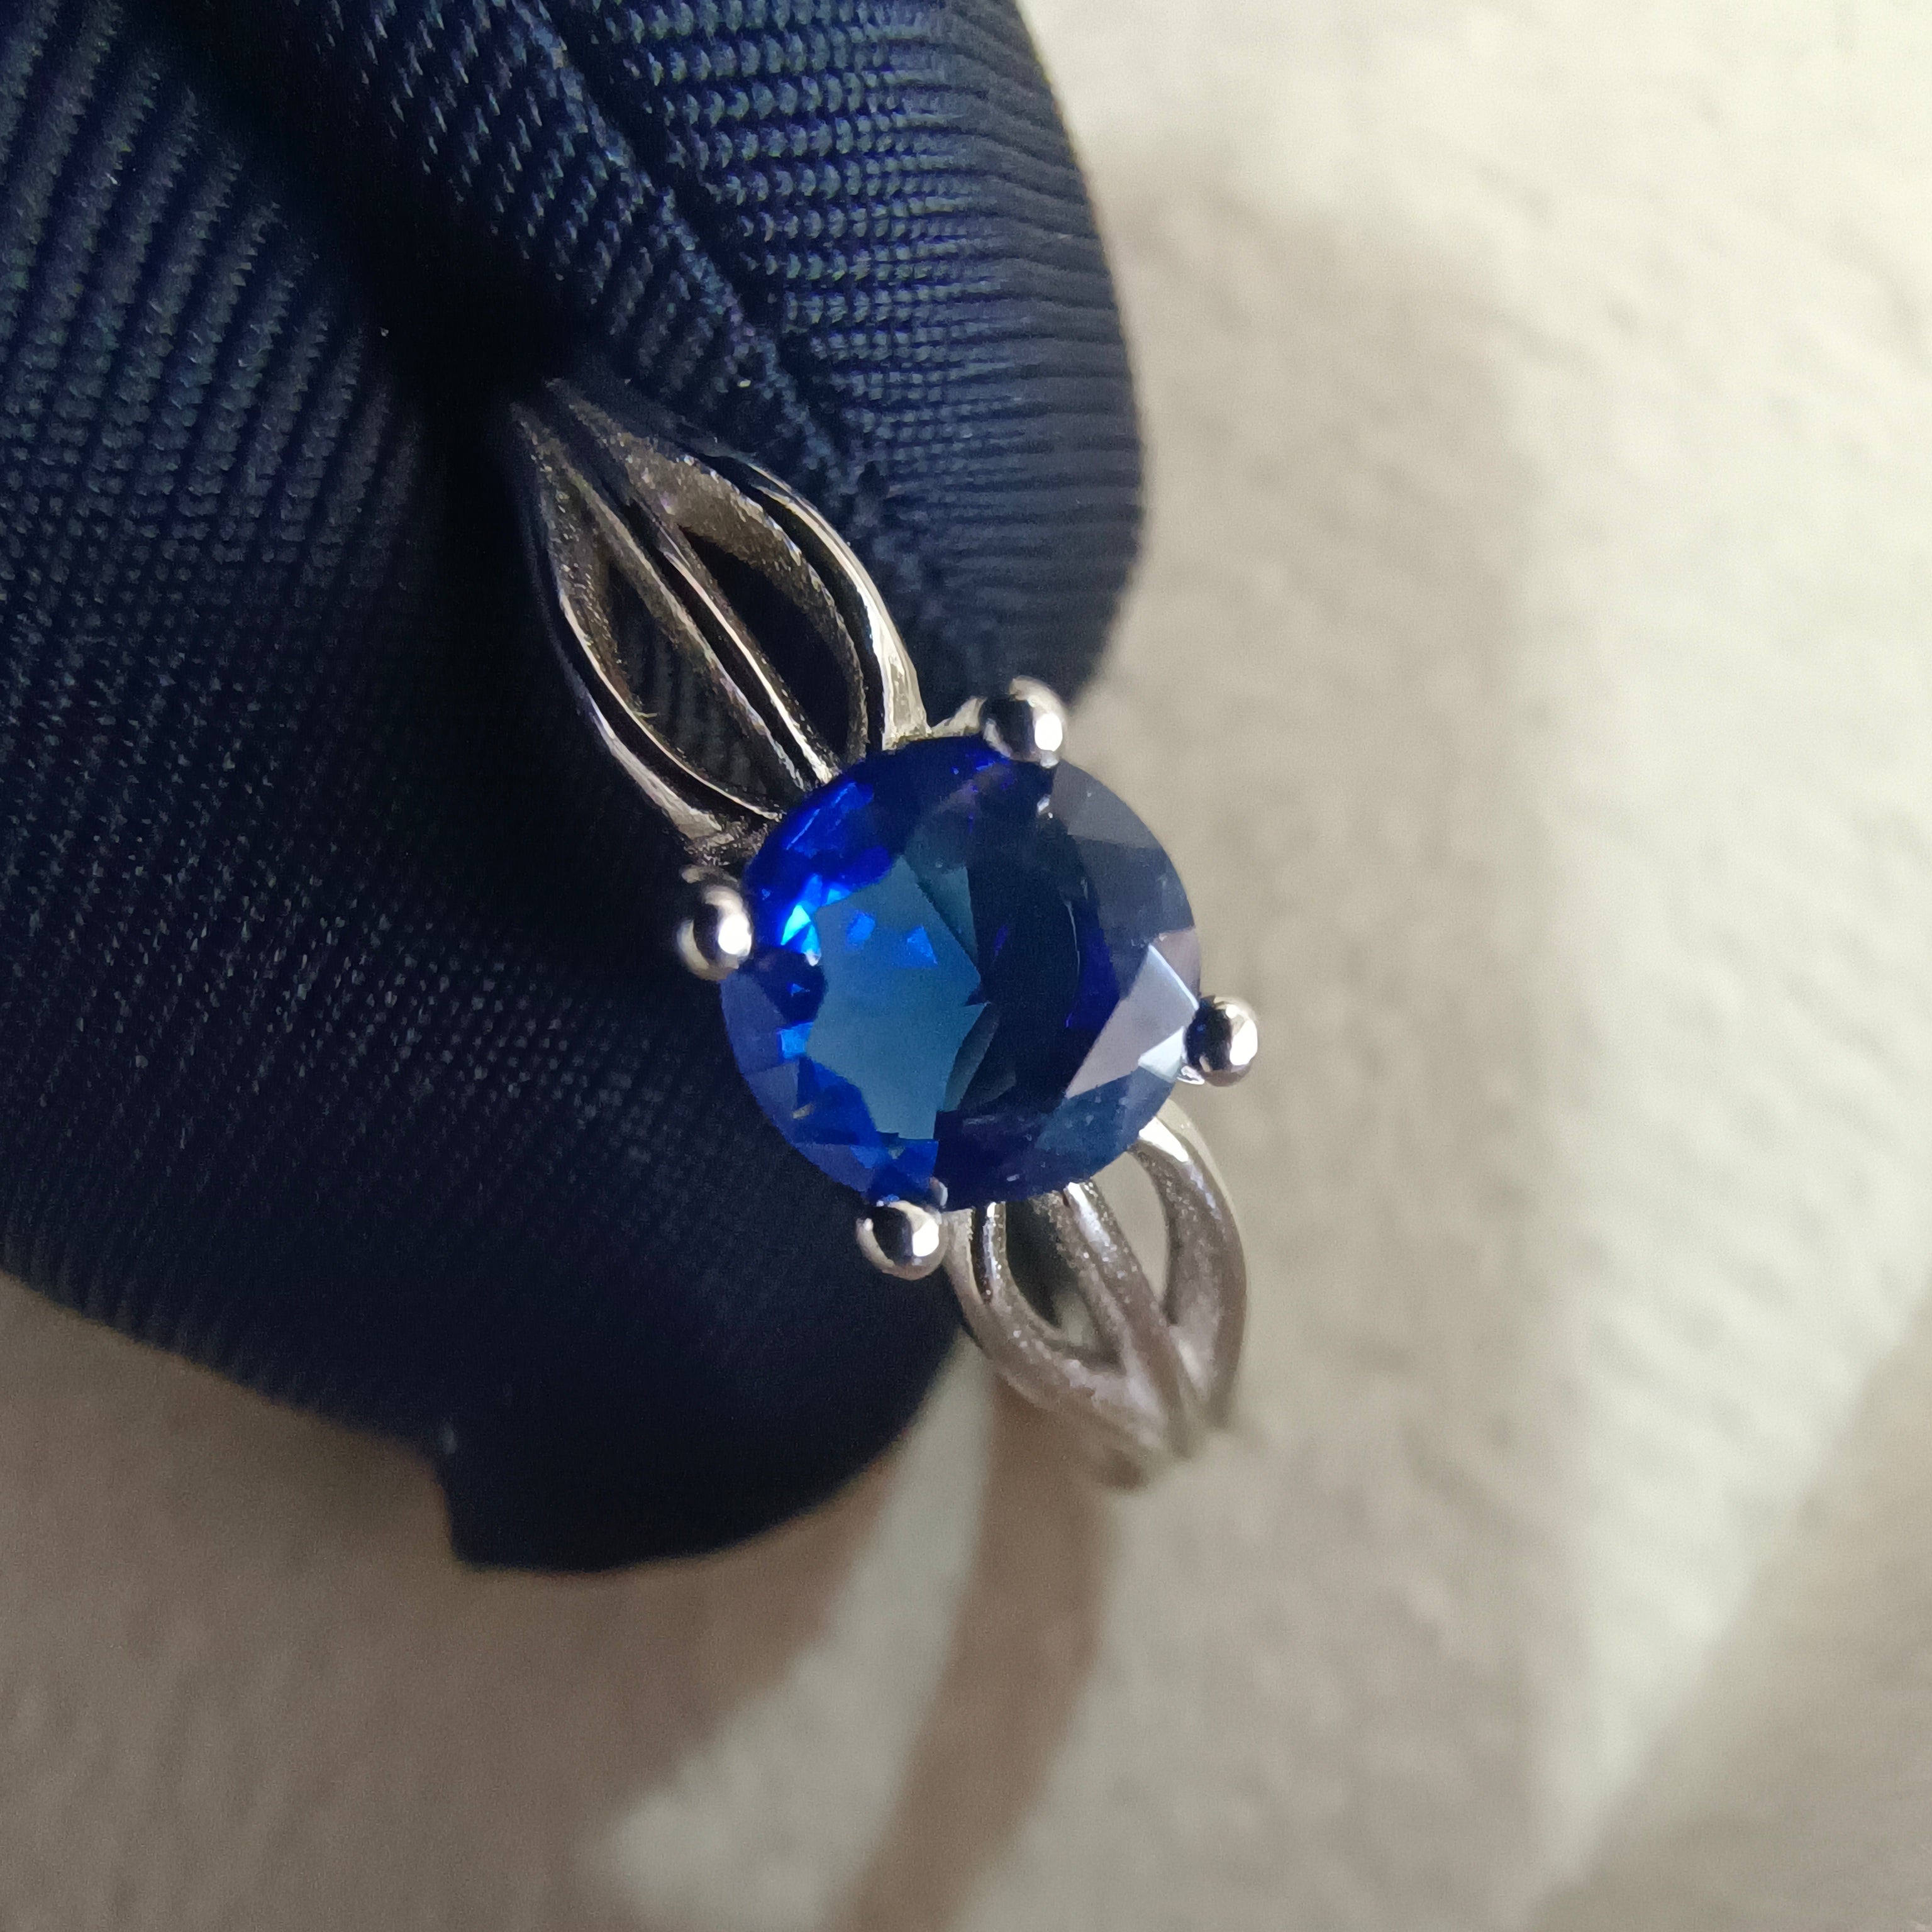 a ring with a blue stone on top of it